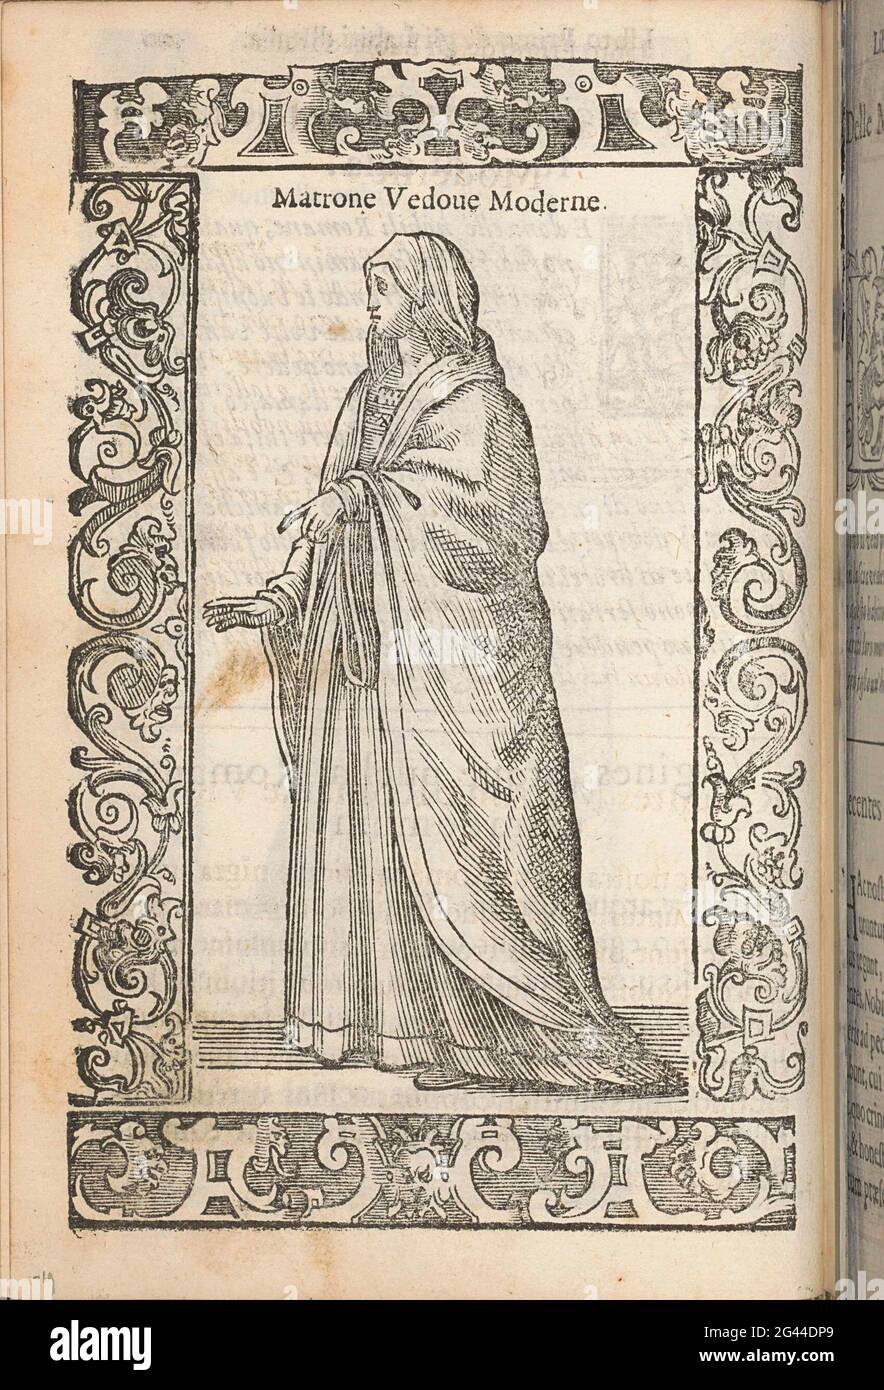 Widow from Rome; Matron widows Modern; Ancient habits, modern and modernisms around the world: new accesses of many figures: dressetus antiquorum, recentorumque totius orbis. Roman Widow in The Contemporary Clothing (at the end of 16th century). She Carries a Rug of Black Florentine 'Rascia' (Silk or Wool) over Which in Stola Or Cape. Veil overlooked. In Ornament Edge. Stock Photo